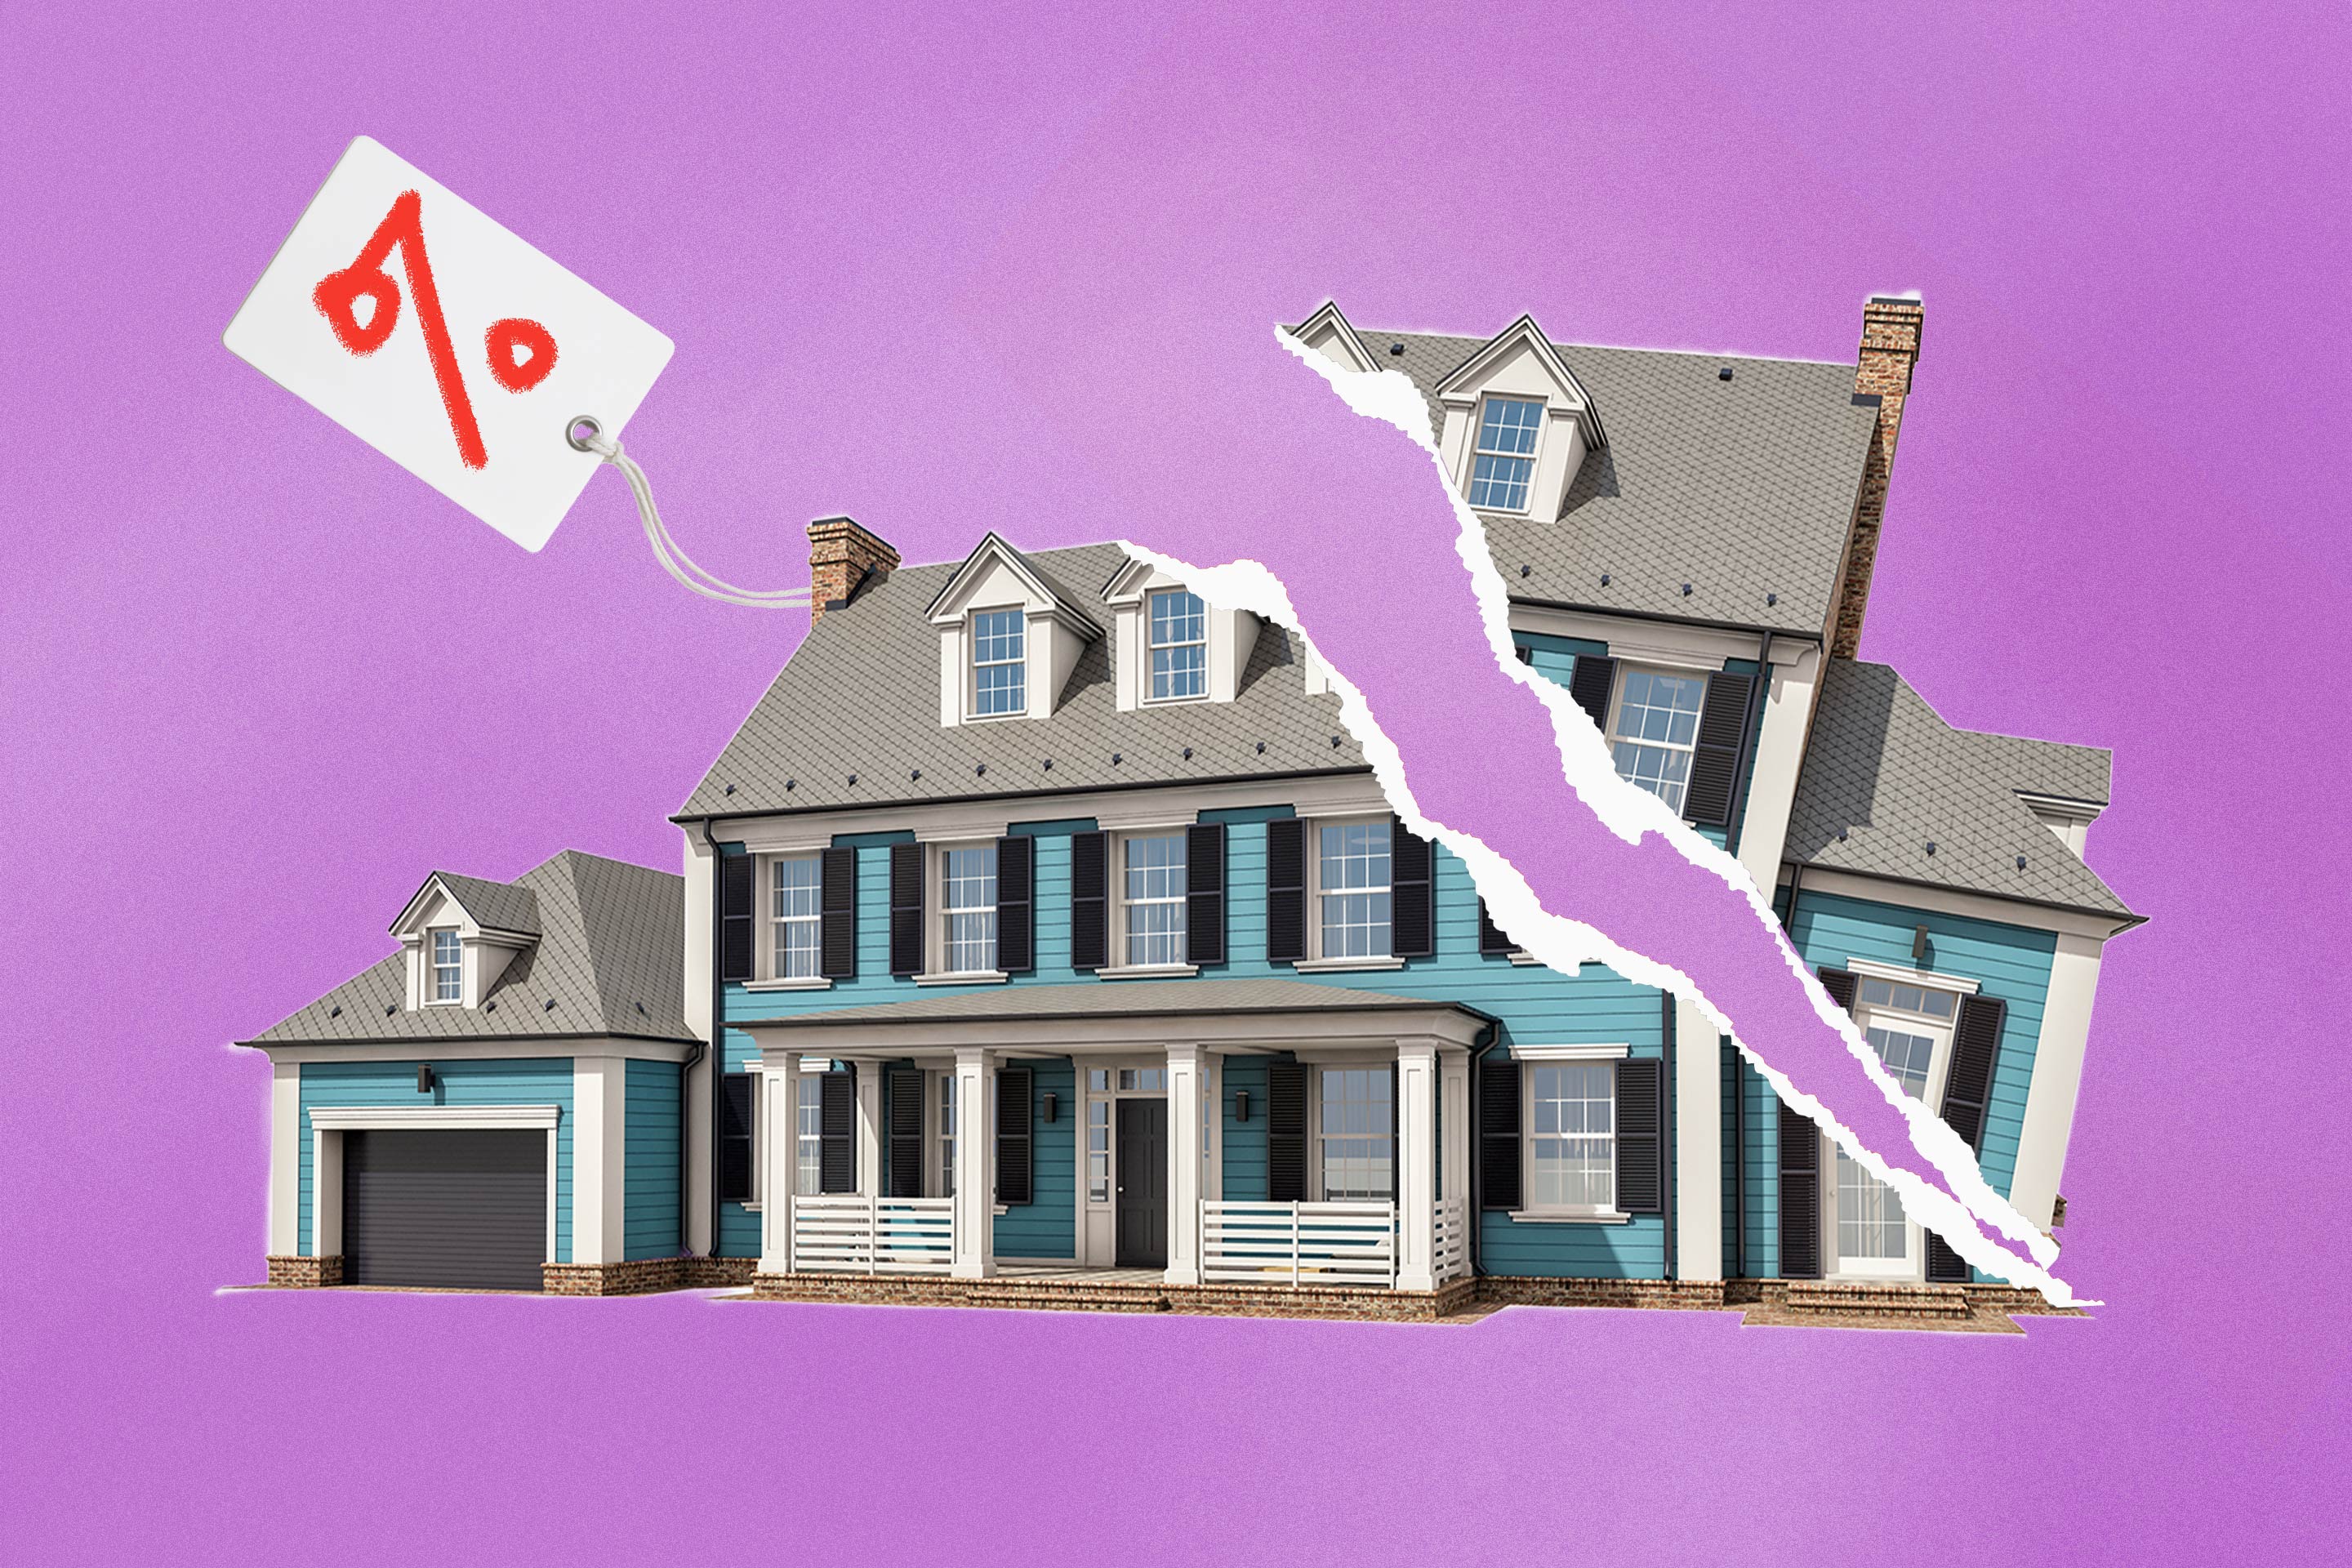 Home Sales Rise as More Sellers Cut Prices and Grant Concessions to Buyers